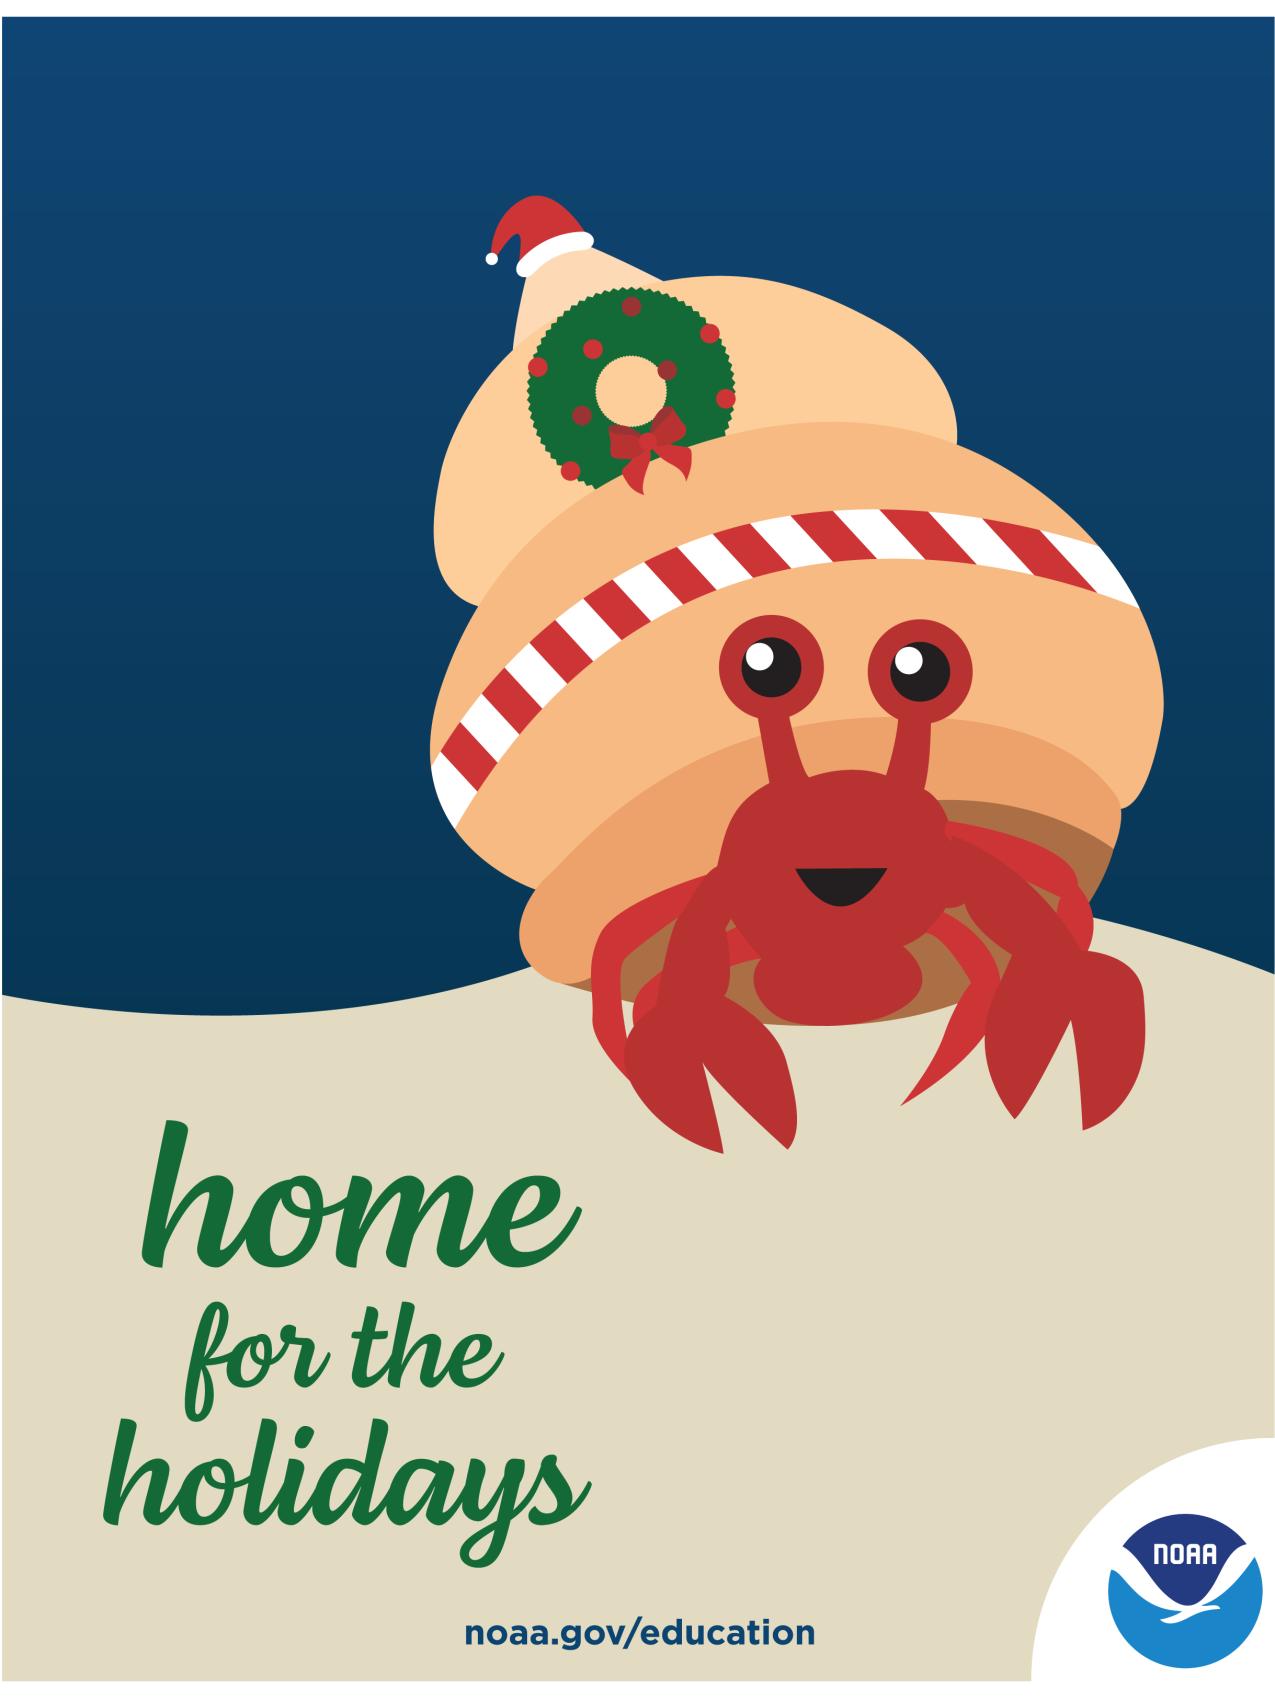 An illustrated holiday card featuring a hermit crab with a shell decorated for the holidays including a wreath, ribbon, and a Santa hat on top. There is a NOAA logo in the corner of the card. Text: Home for the holidays! noaa.gov/education